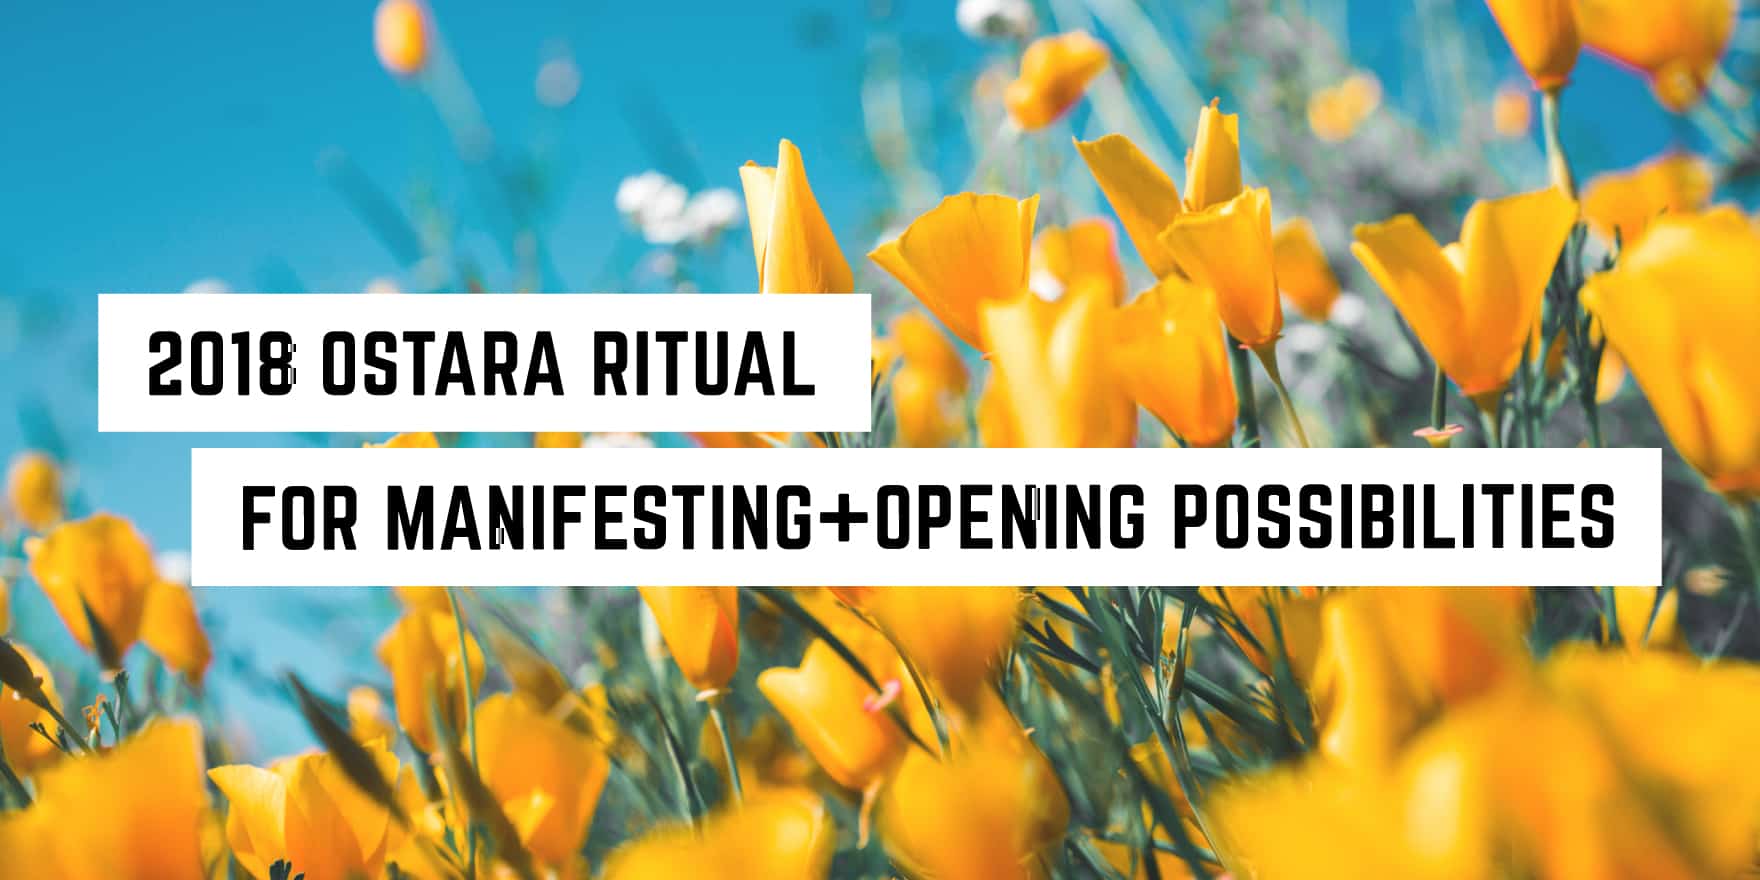 A vibrant field of yellow flowers under a clear blue sky with text overlay "2018 ostara ritual for manifesting + opening possibilities" indicating a themed event or celebration related to the spring equinox,